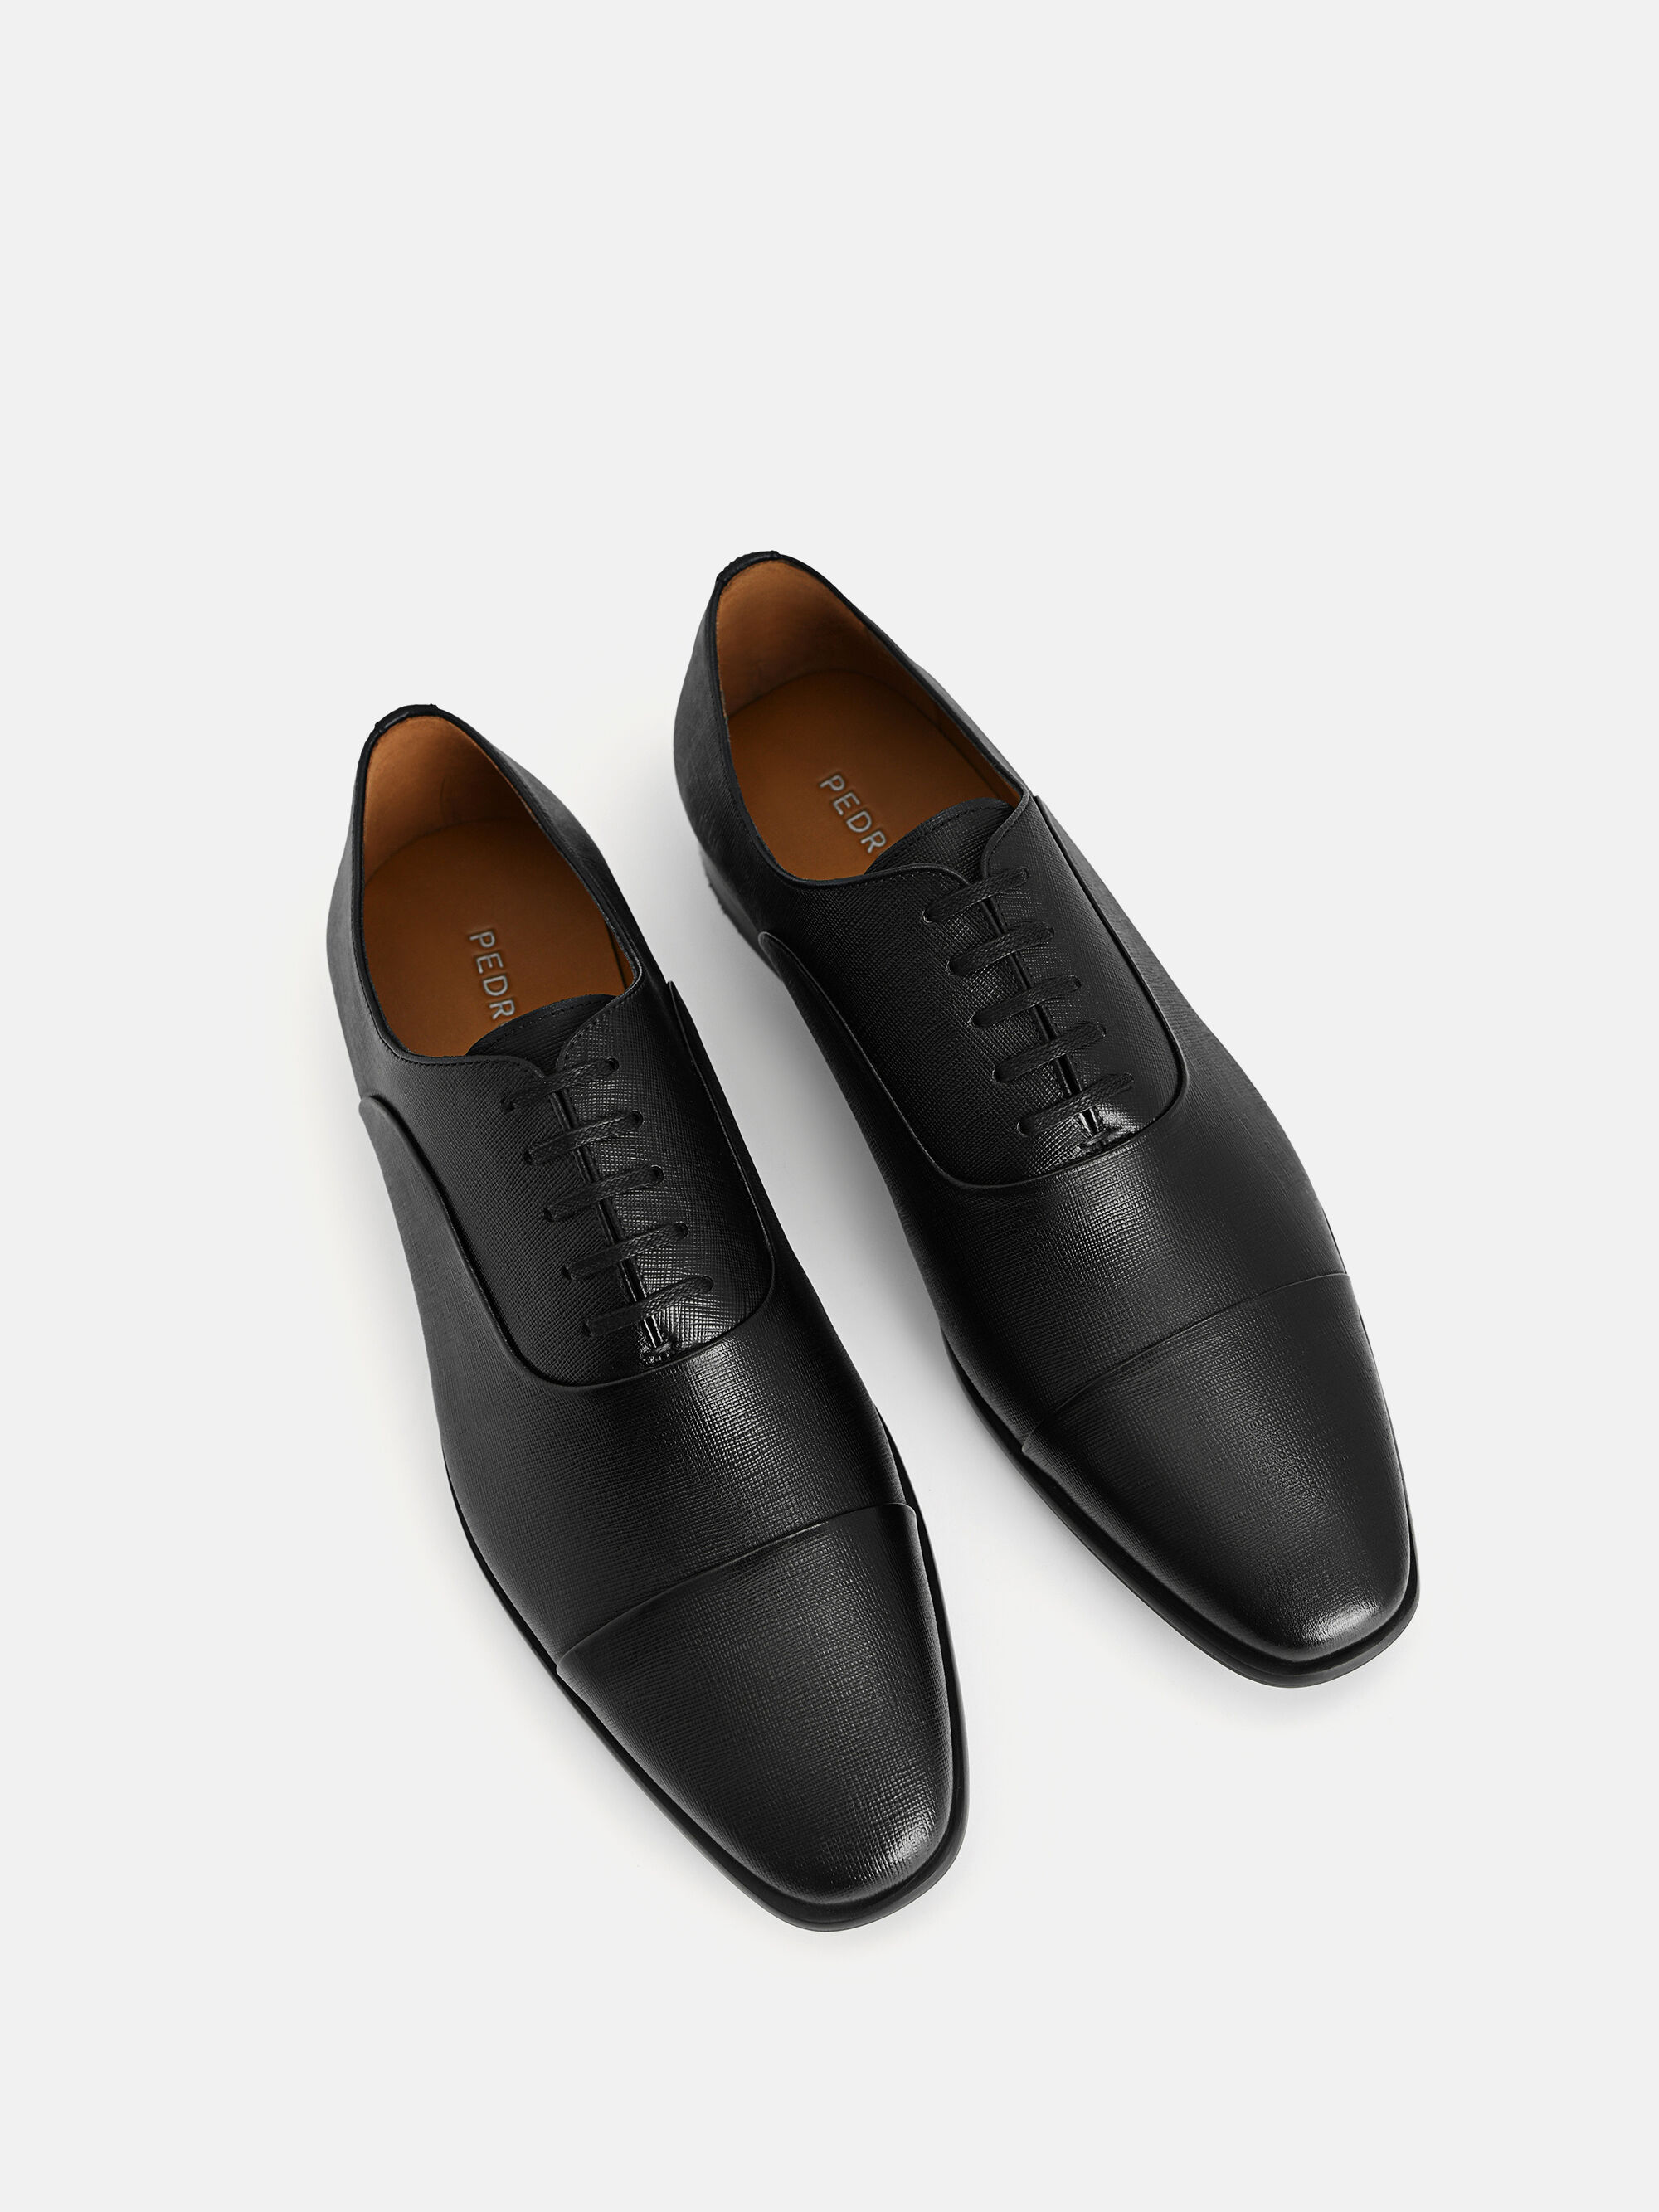 Textured Leather Oxford Shoes - Black